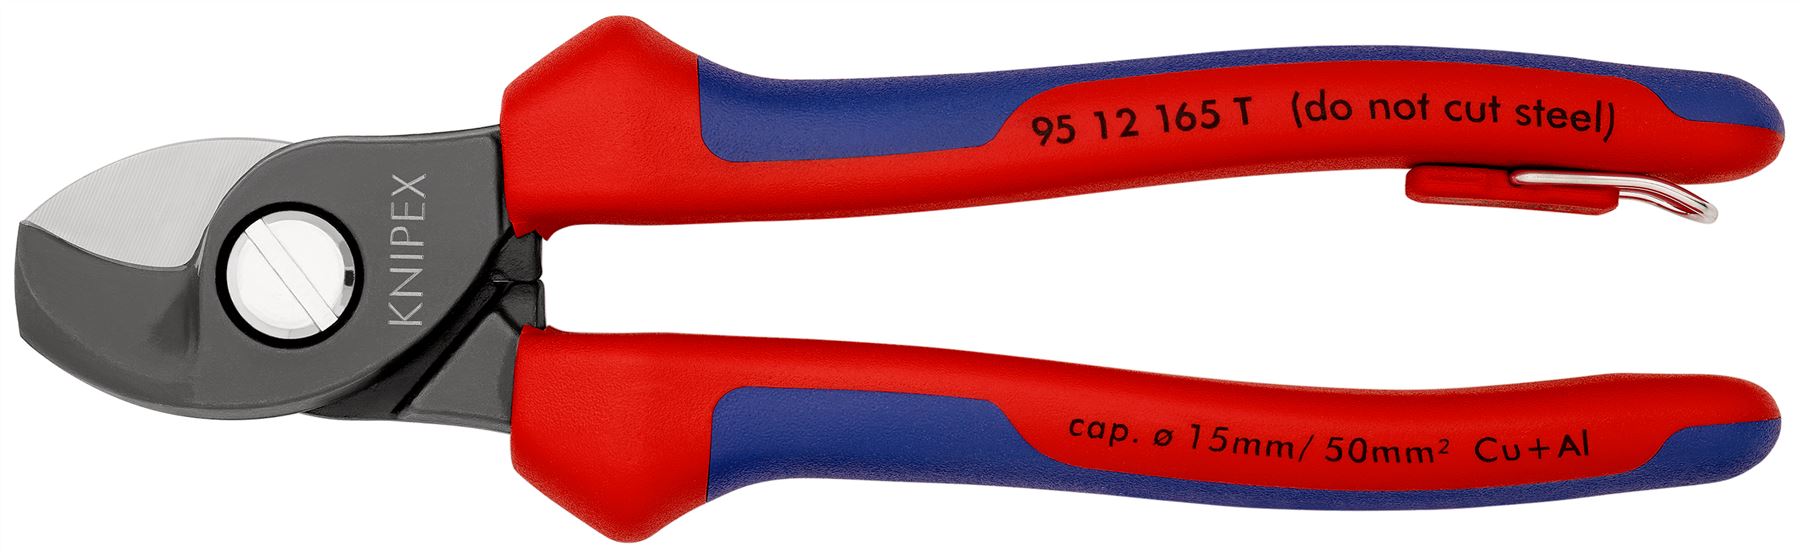 Knipex Cable Shears 165mm Multi Component Grips with Tether Point 95 12 165 T